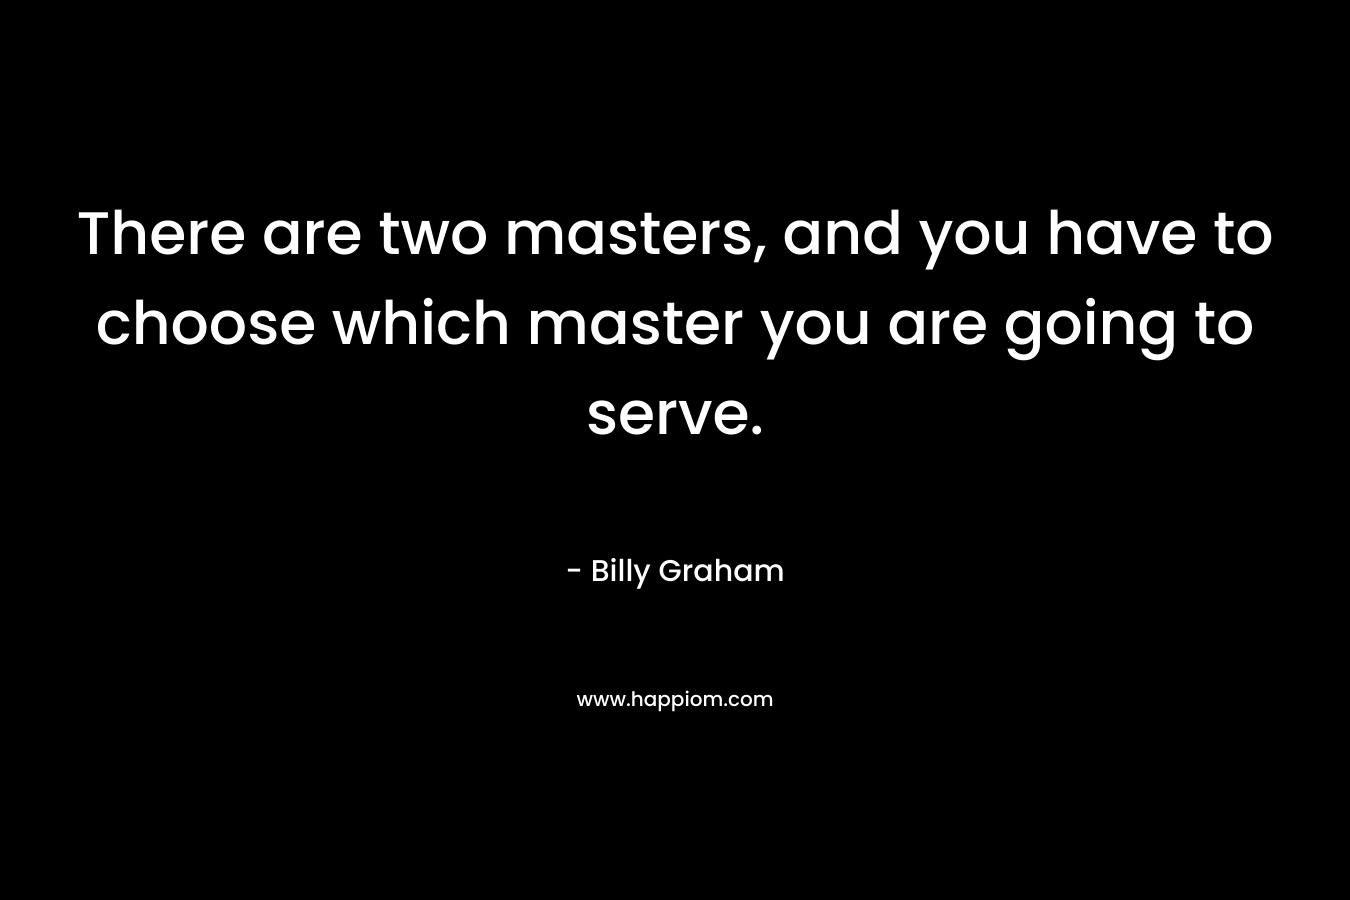 There are two masters, and you have to choose which master you are going to serve.